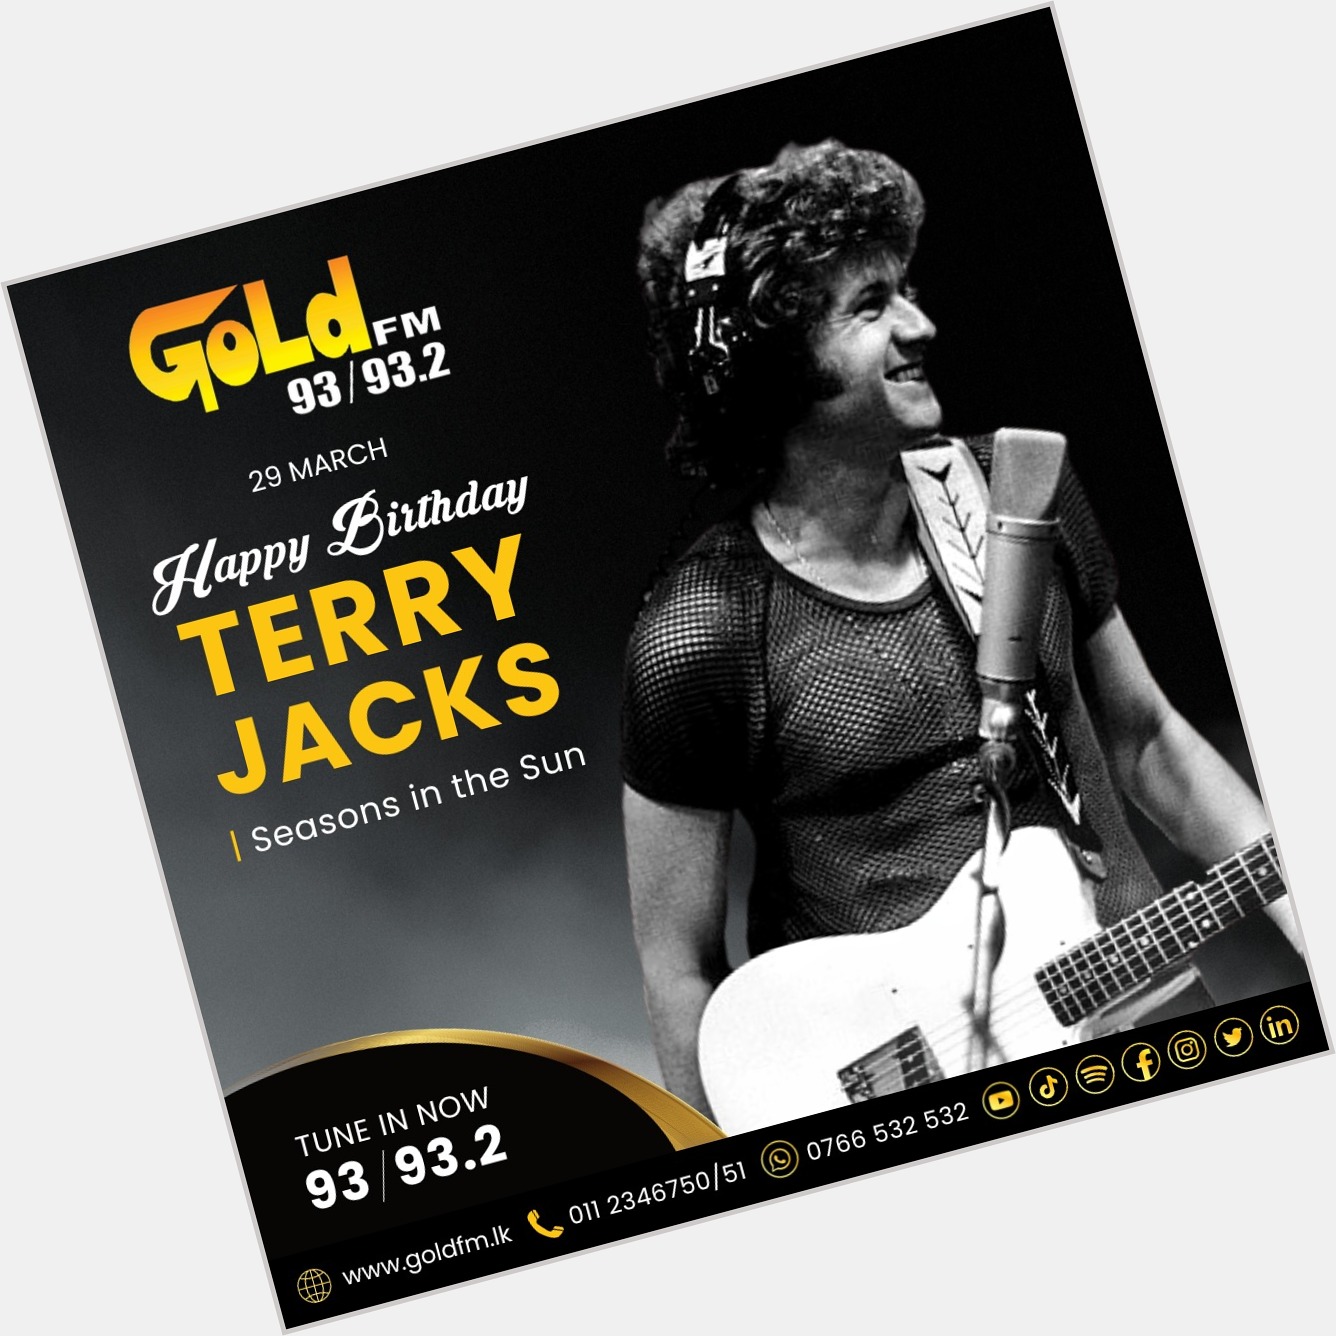 HAPPY BIRTHDAY TO TERRY JACKS TUNE IN NOW 93 / 93.2 Island wide      